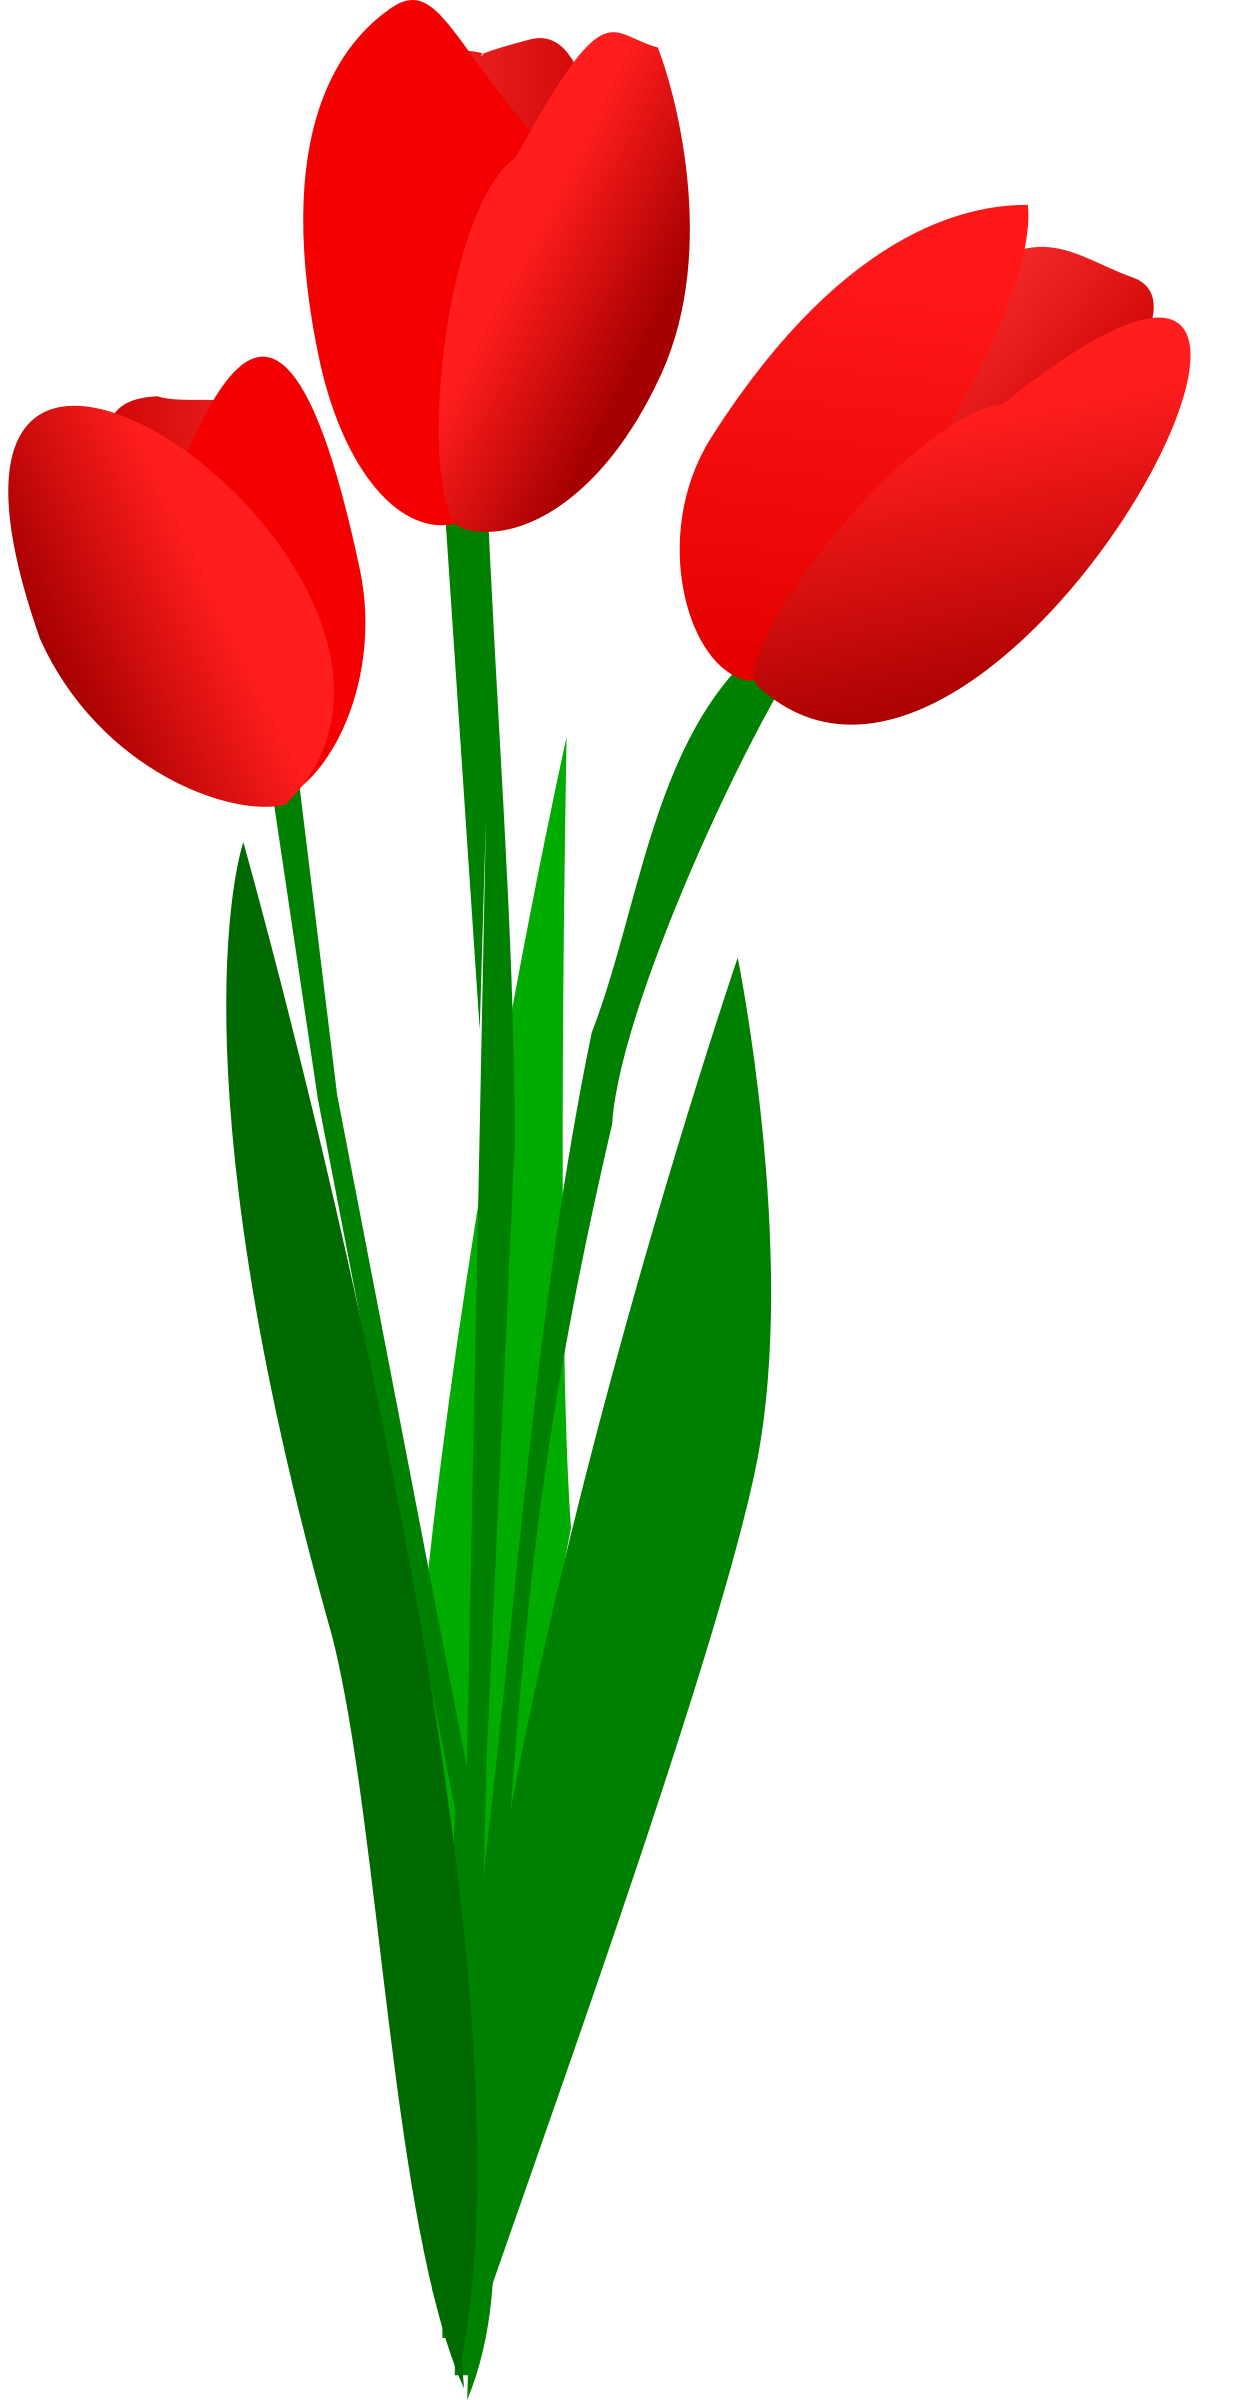 Three red tulips hoa. Clipart easter tulip